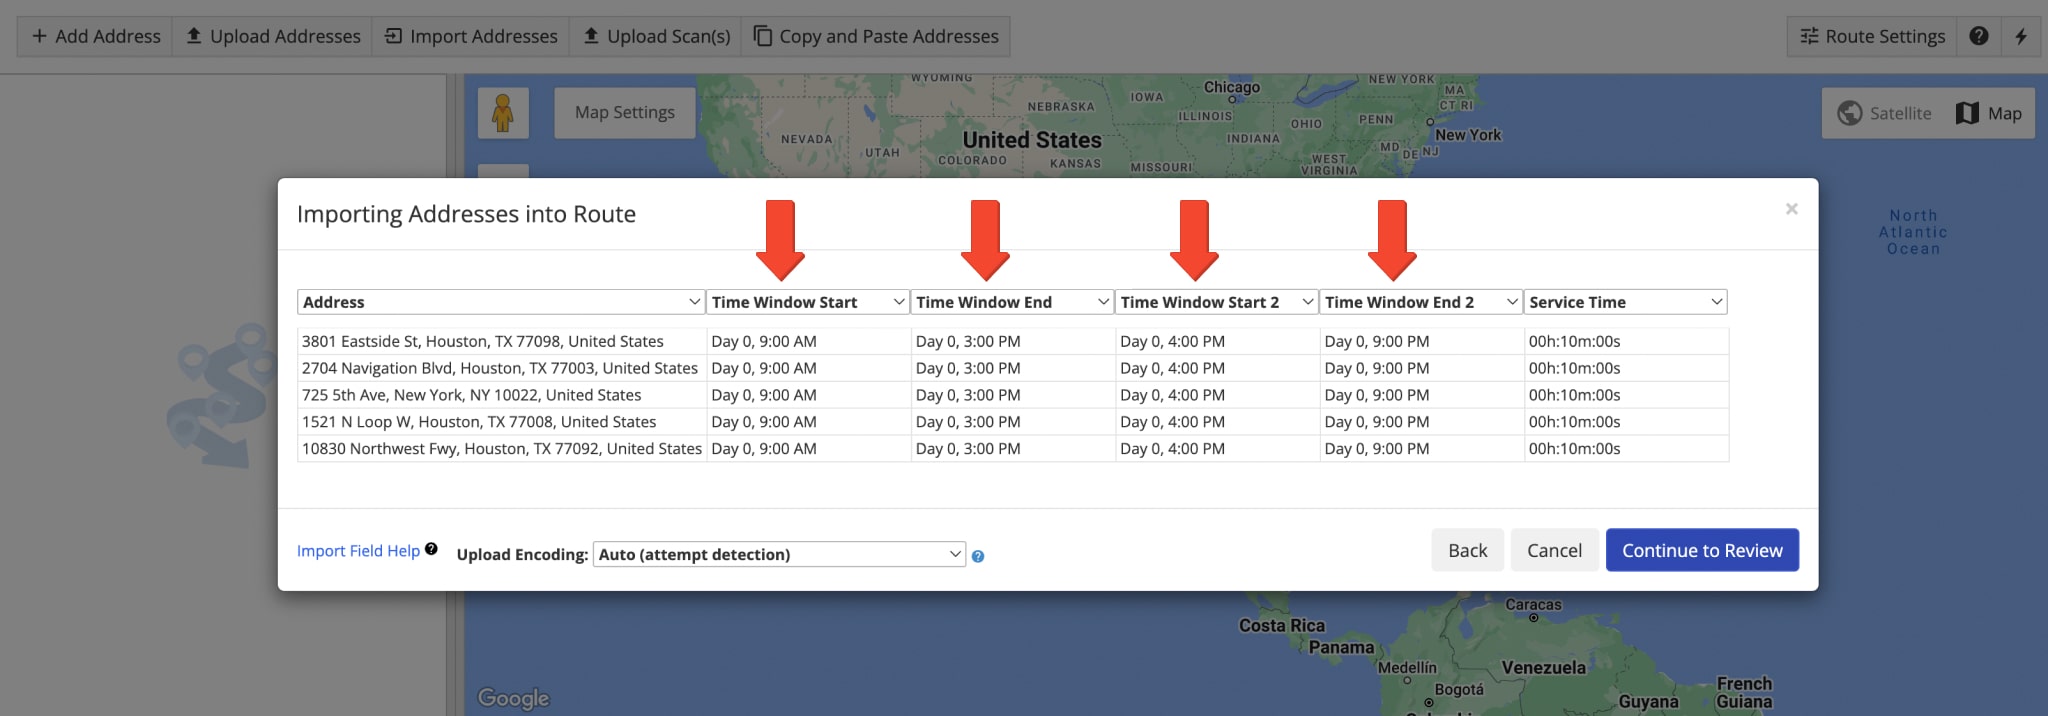 Verify route addresses and customer Time Windows in the uploaded spreadsheet. 